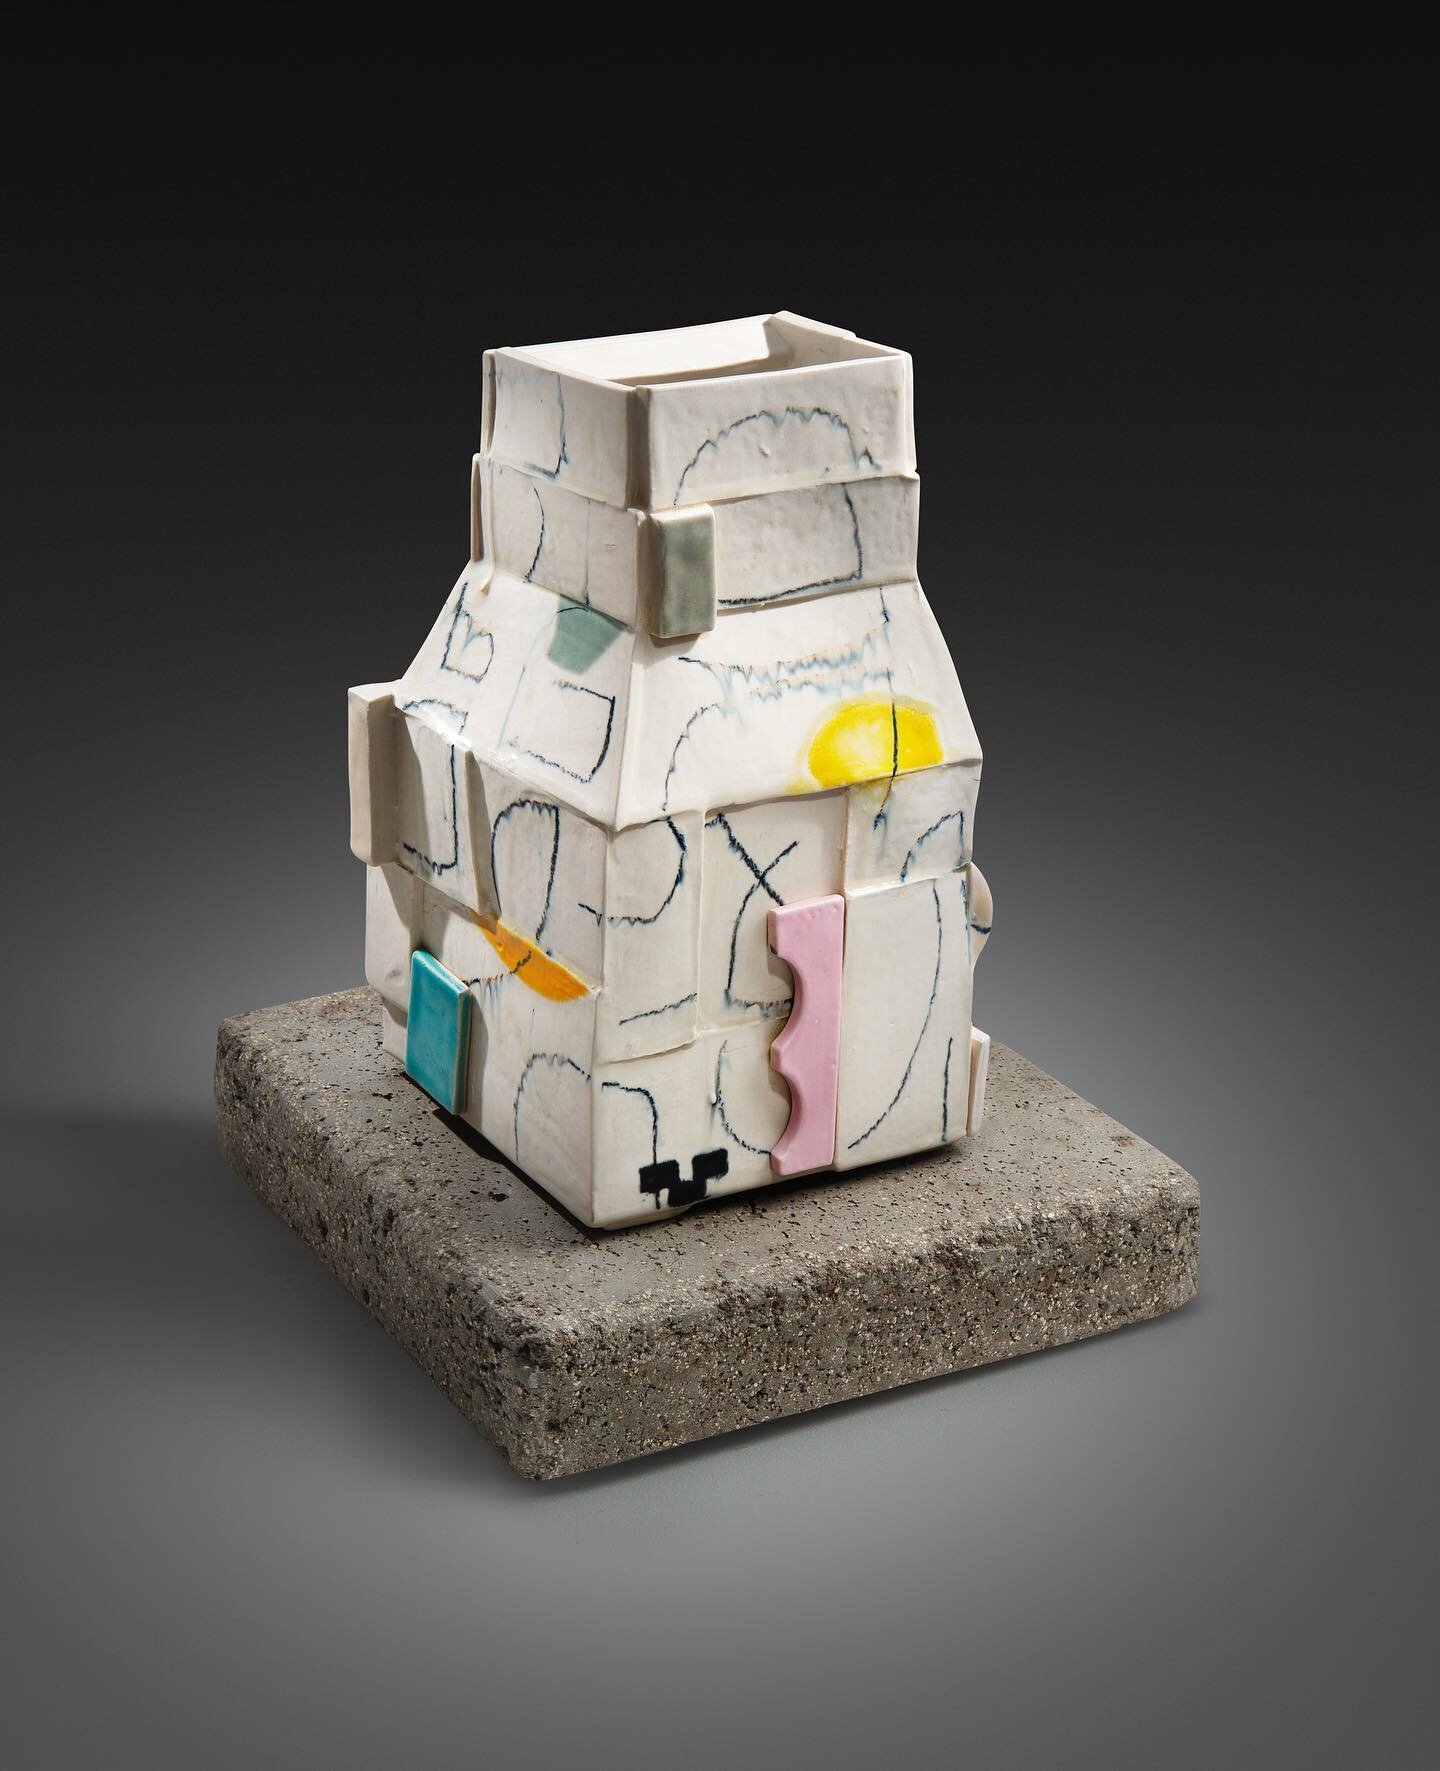 My &ldquo;Vase on Cement Base&rdquo;will be shown at Duke Energy Convention Center NCECA Rooms 200-202, Room 236
WESTERN RESERVE CURRENTS

Cleveland Institute of Art, alumni and teachers, will be showing along with 
A diverse showcase of contemporary